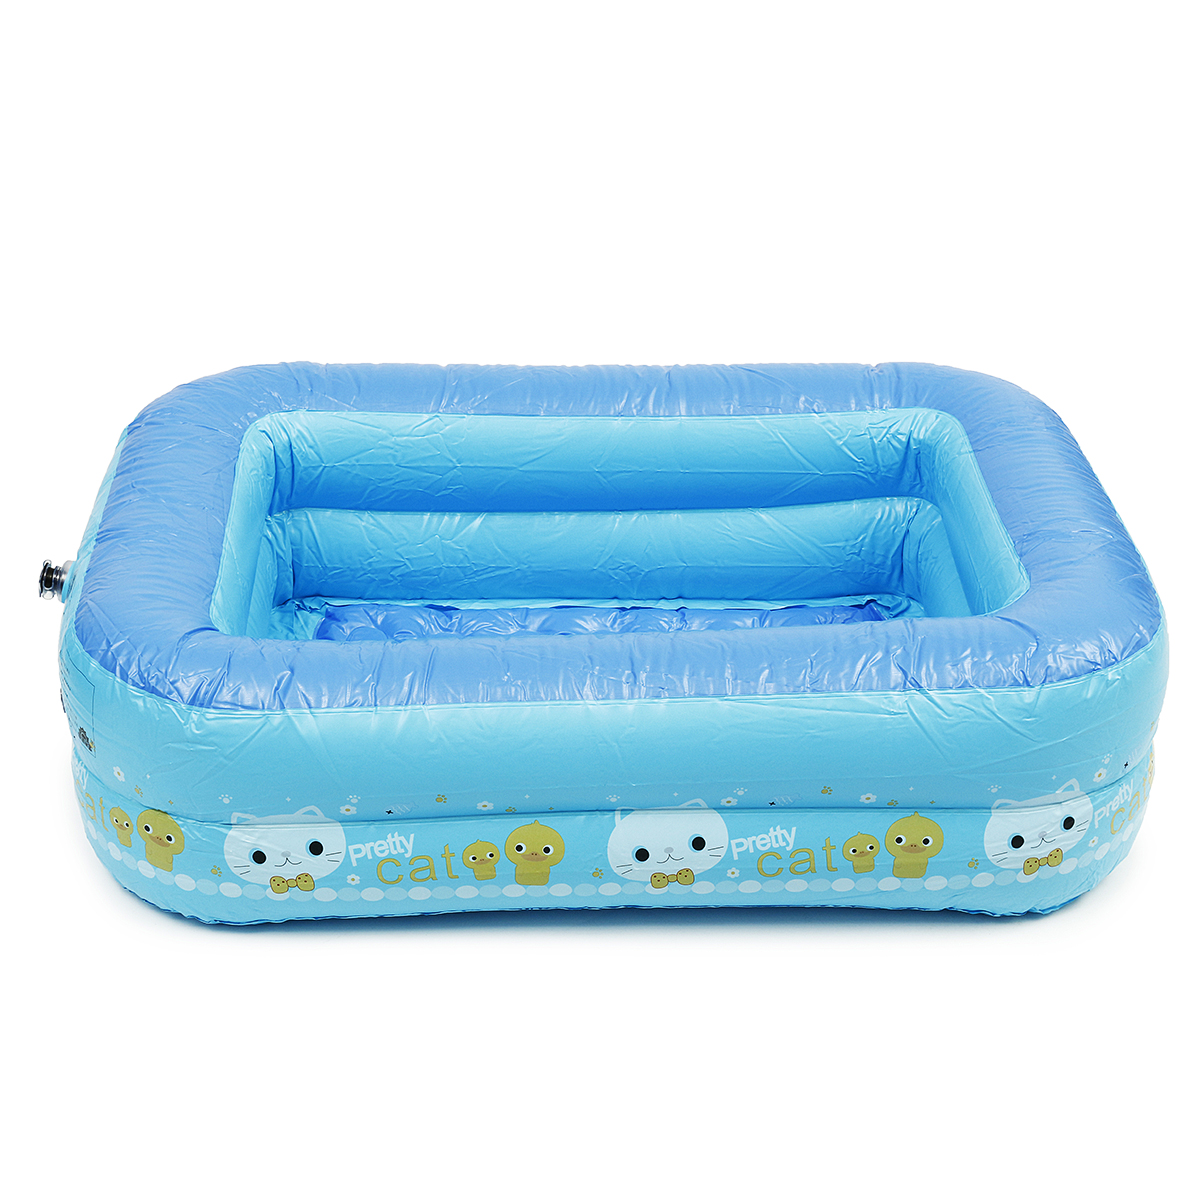 Baby-kids-Toddler-Child-PVC-Inflatable-Swimming-Pools-Bath-Spas-Summer-Fun-Toy-1293948